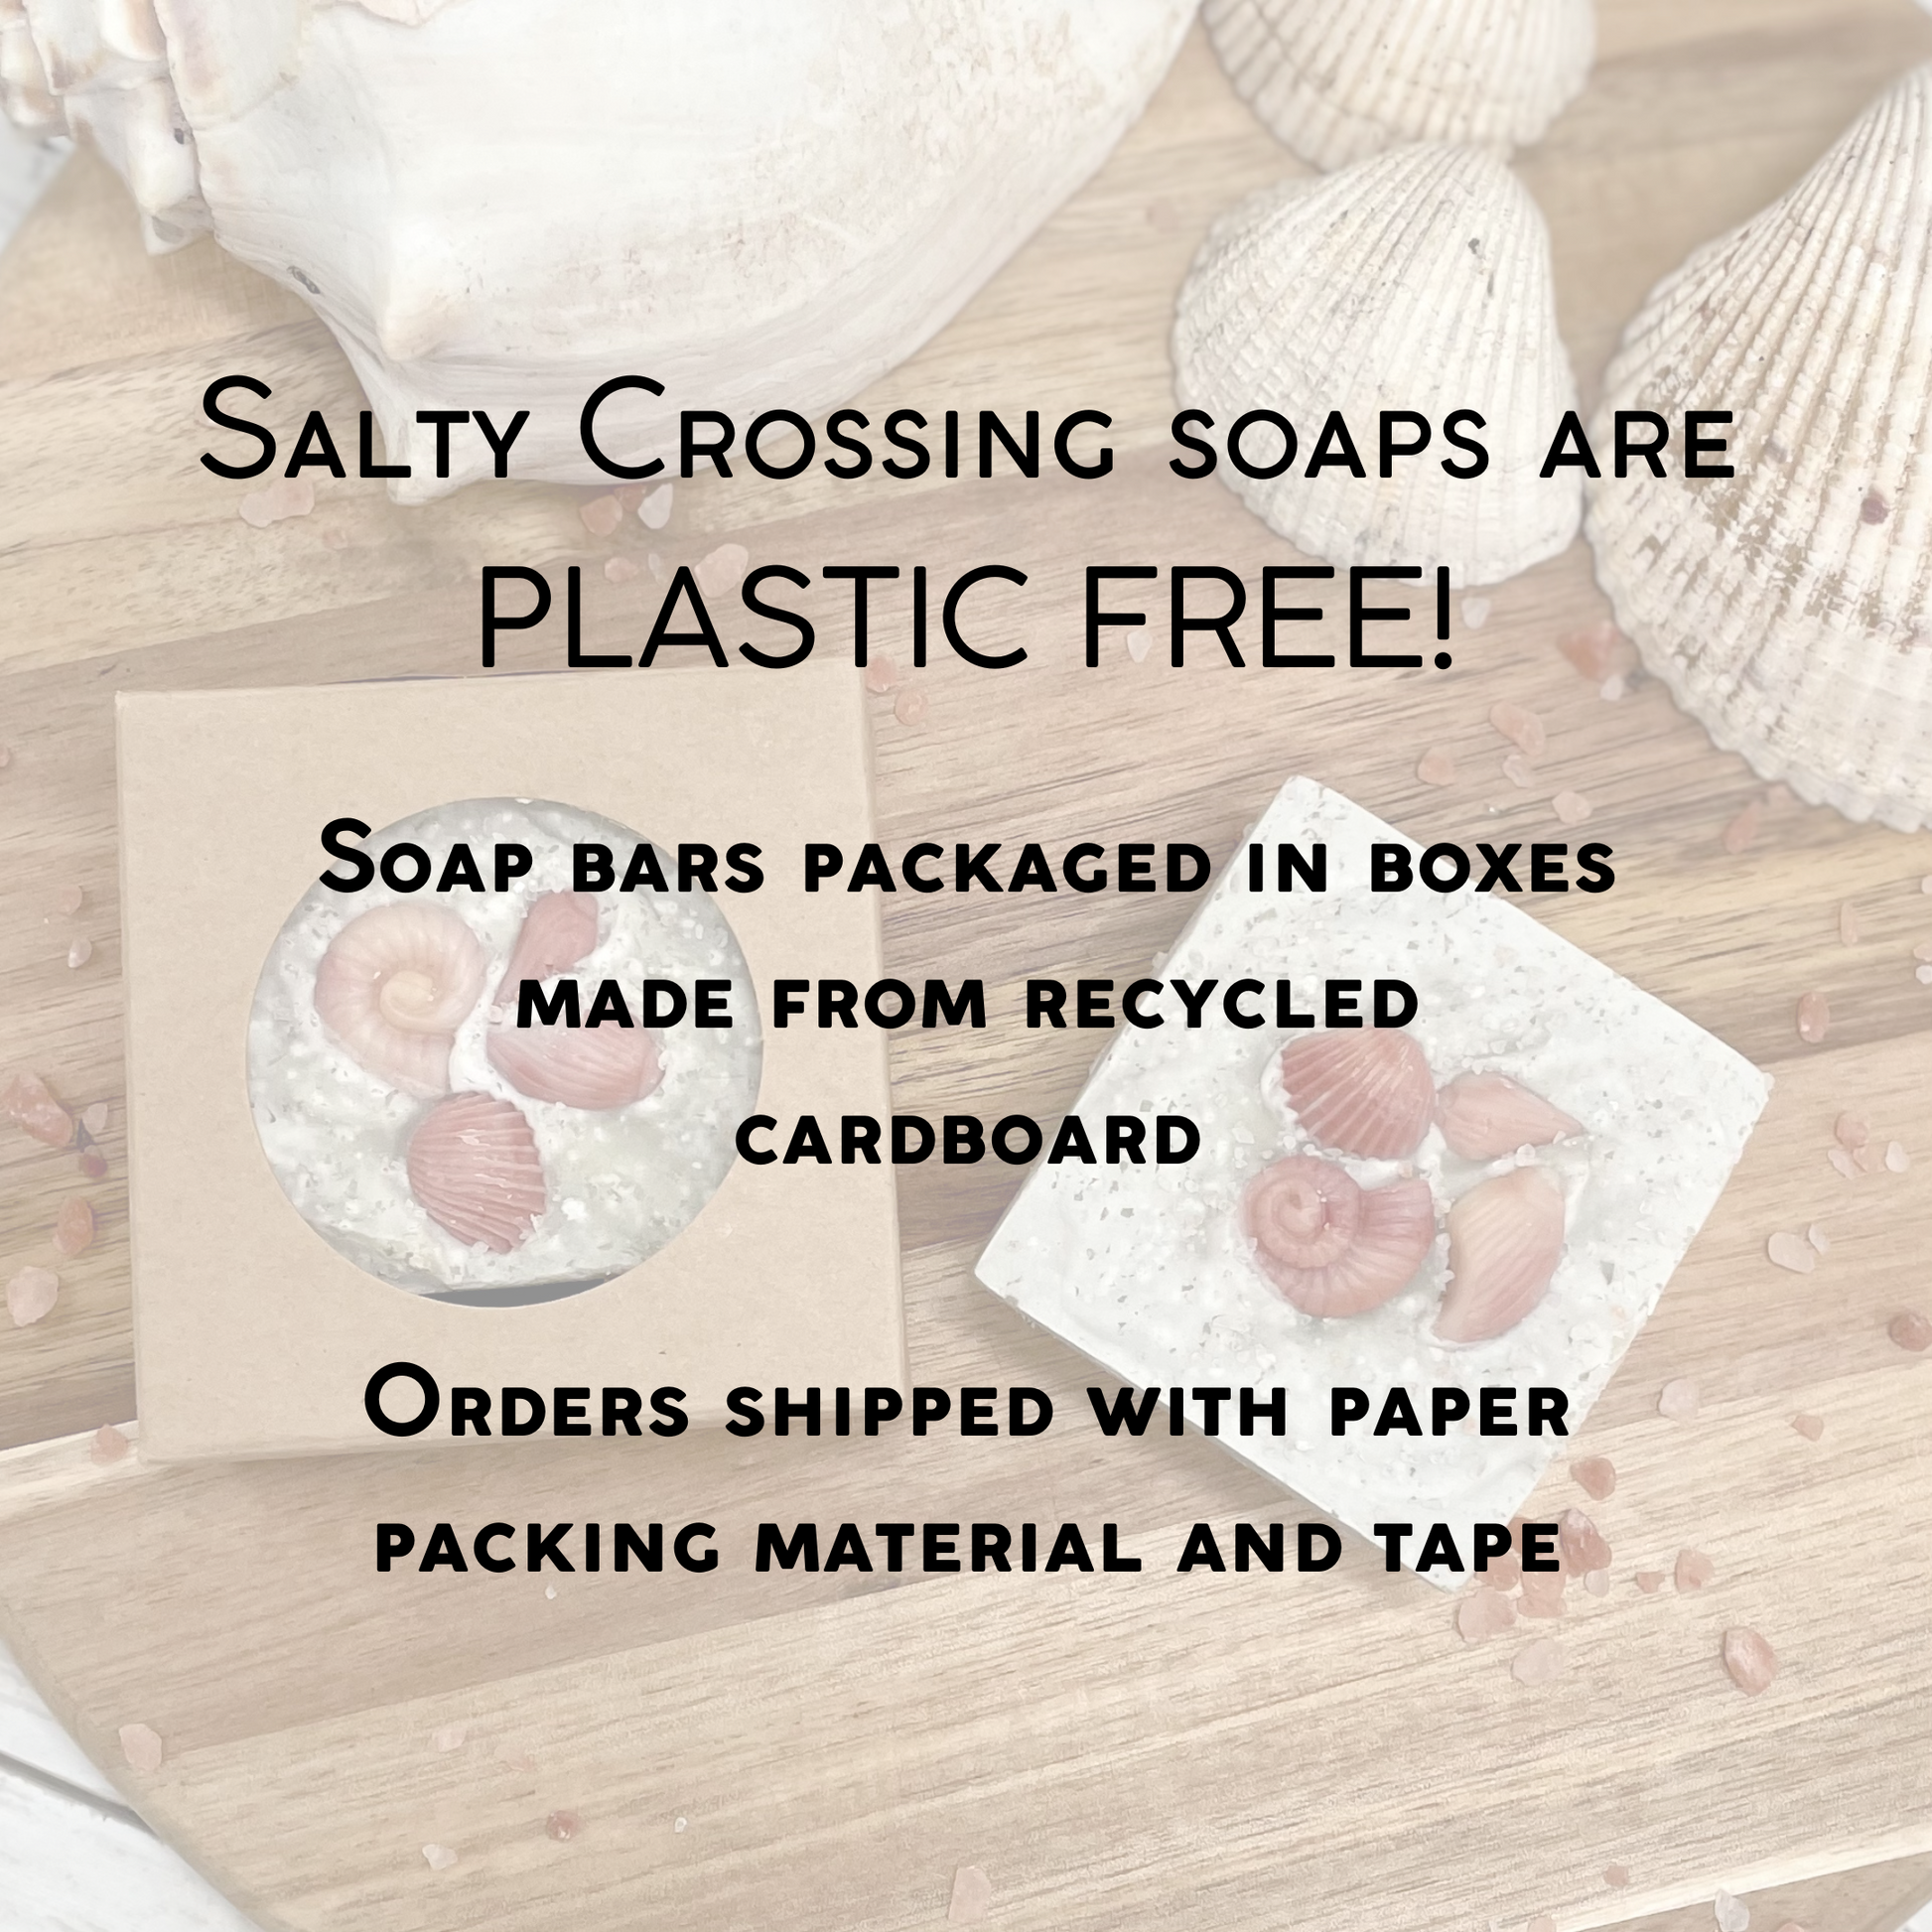 graphic. salty crossing soaps are plastic free. soap bars are packaged in boxes made from recycled cardboard. orders are shipped with paper packing materials and tape.